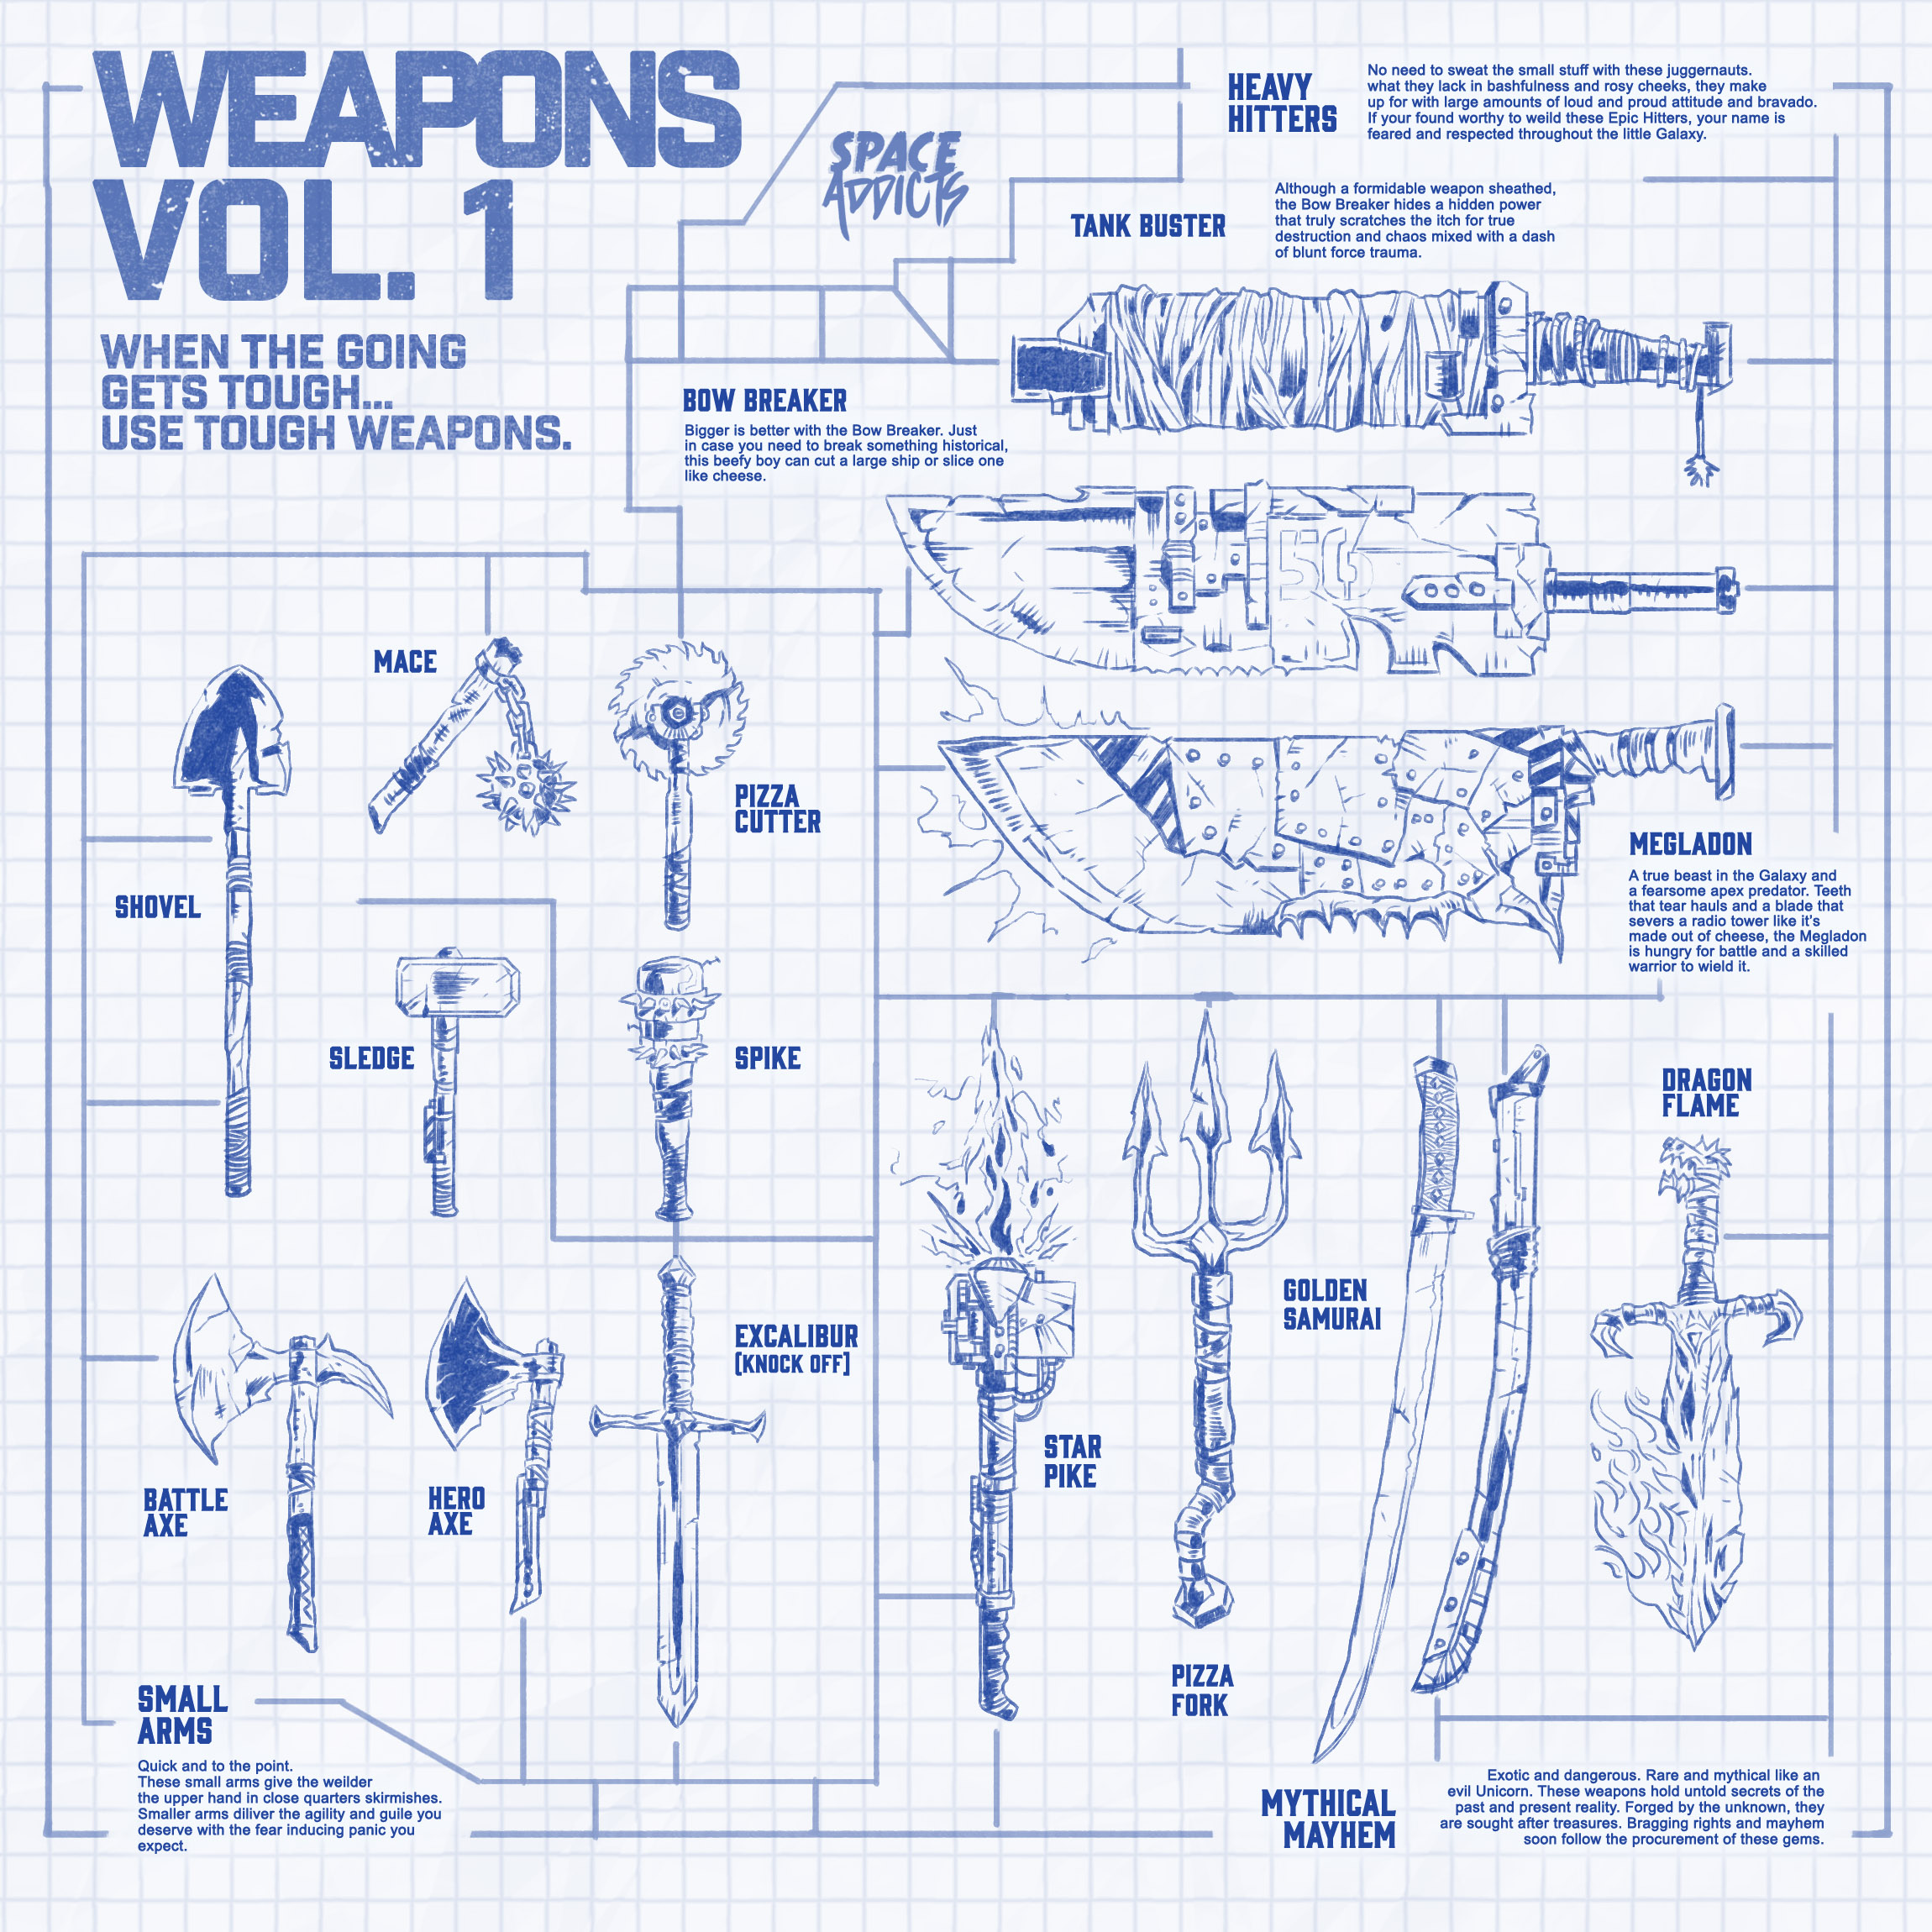 Weapons Vol. 1